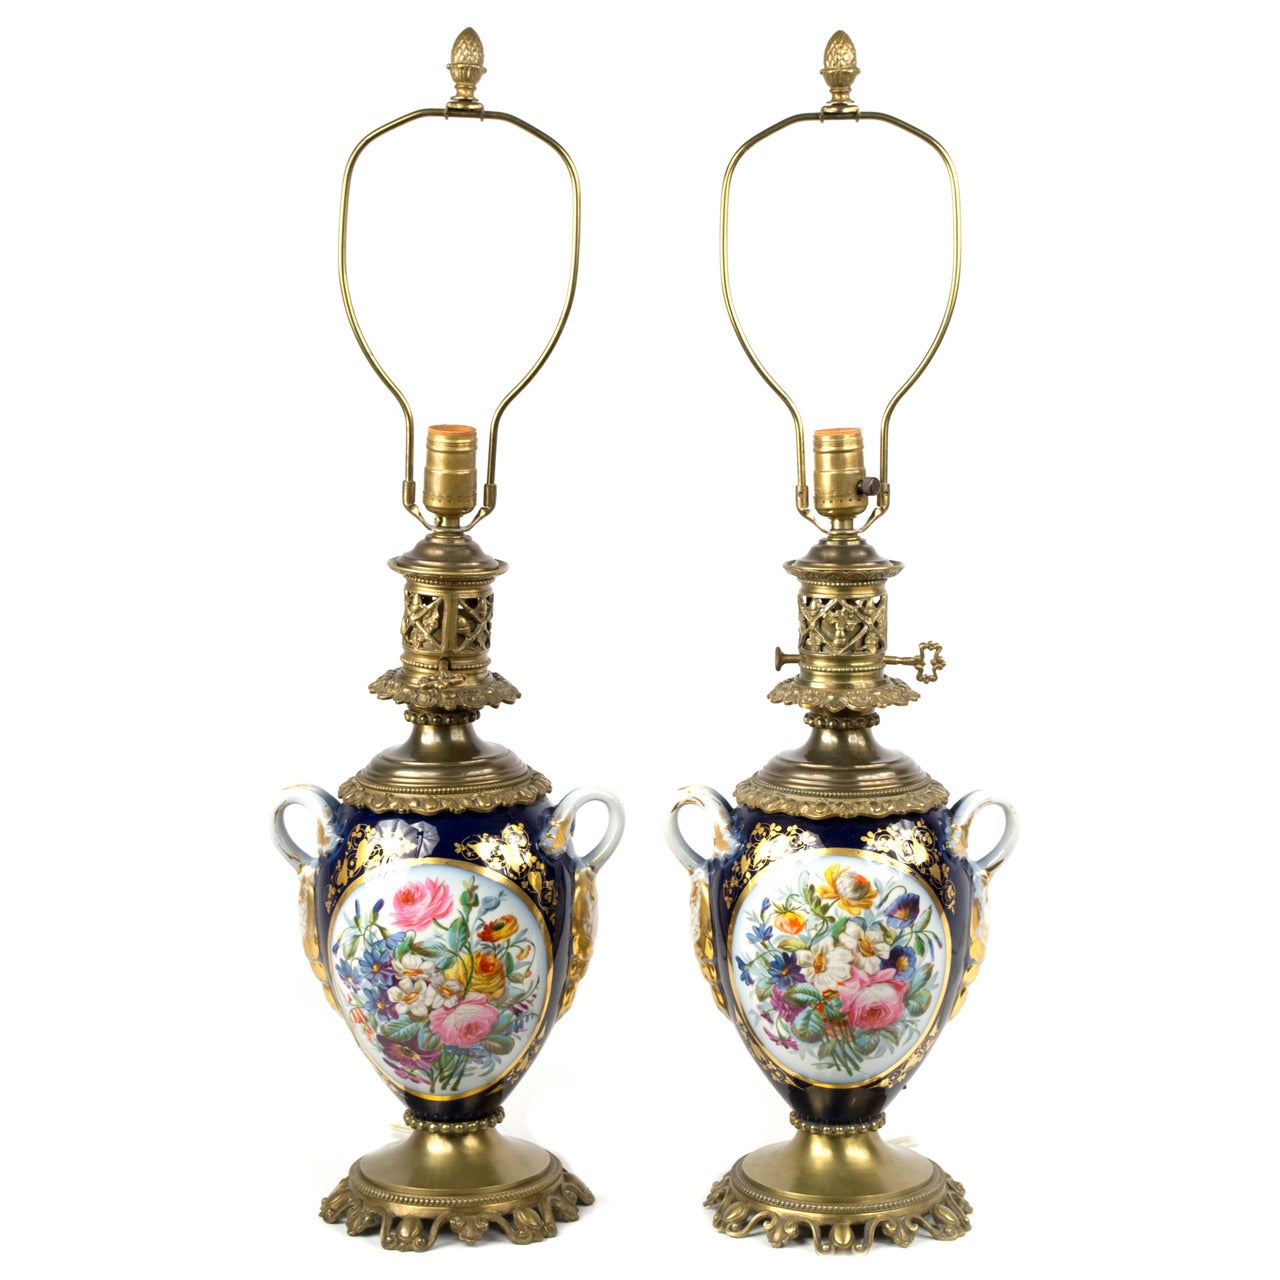 A Pair Of French Porcelain Lamped Vases With Ormolu Mounts